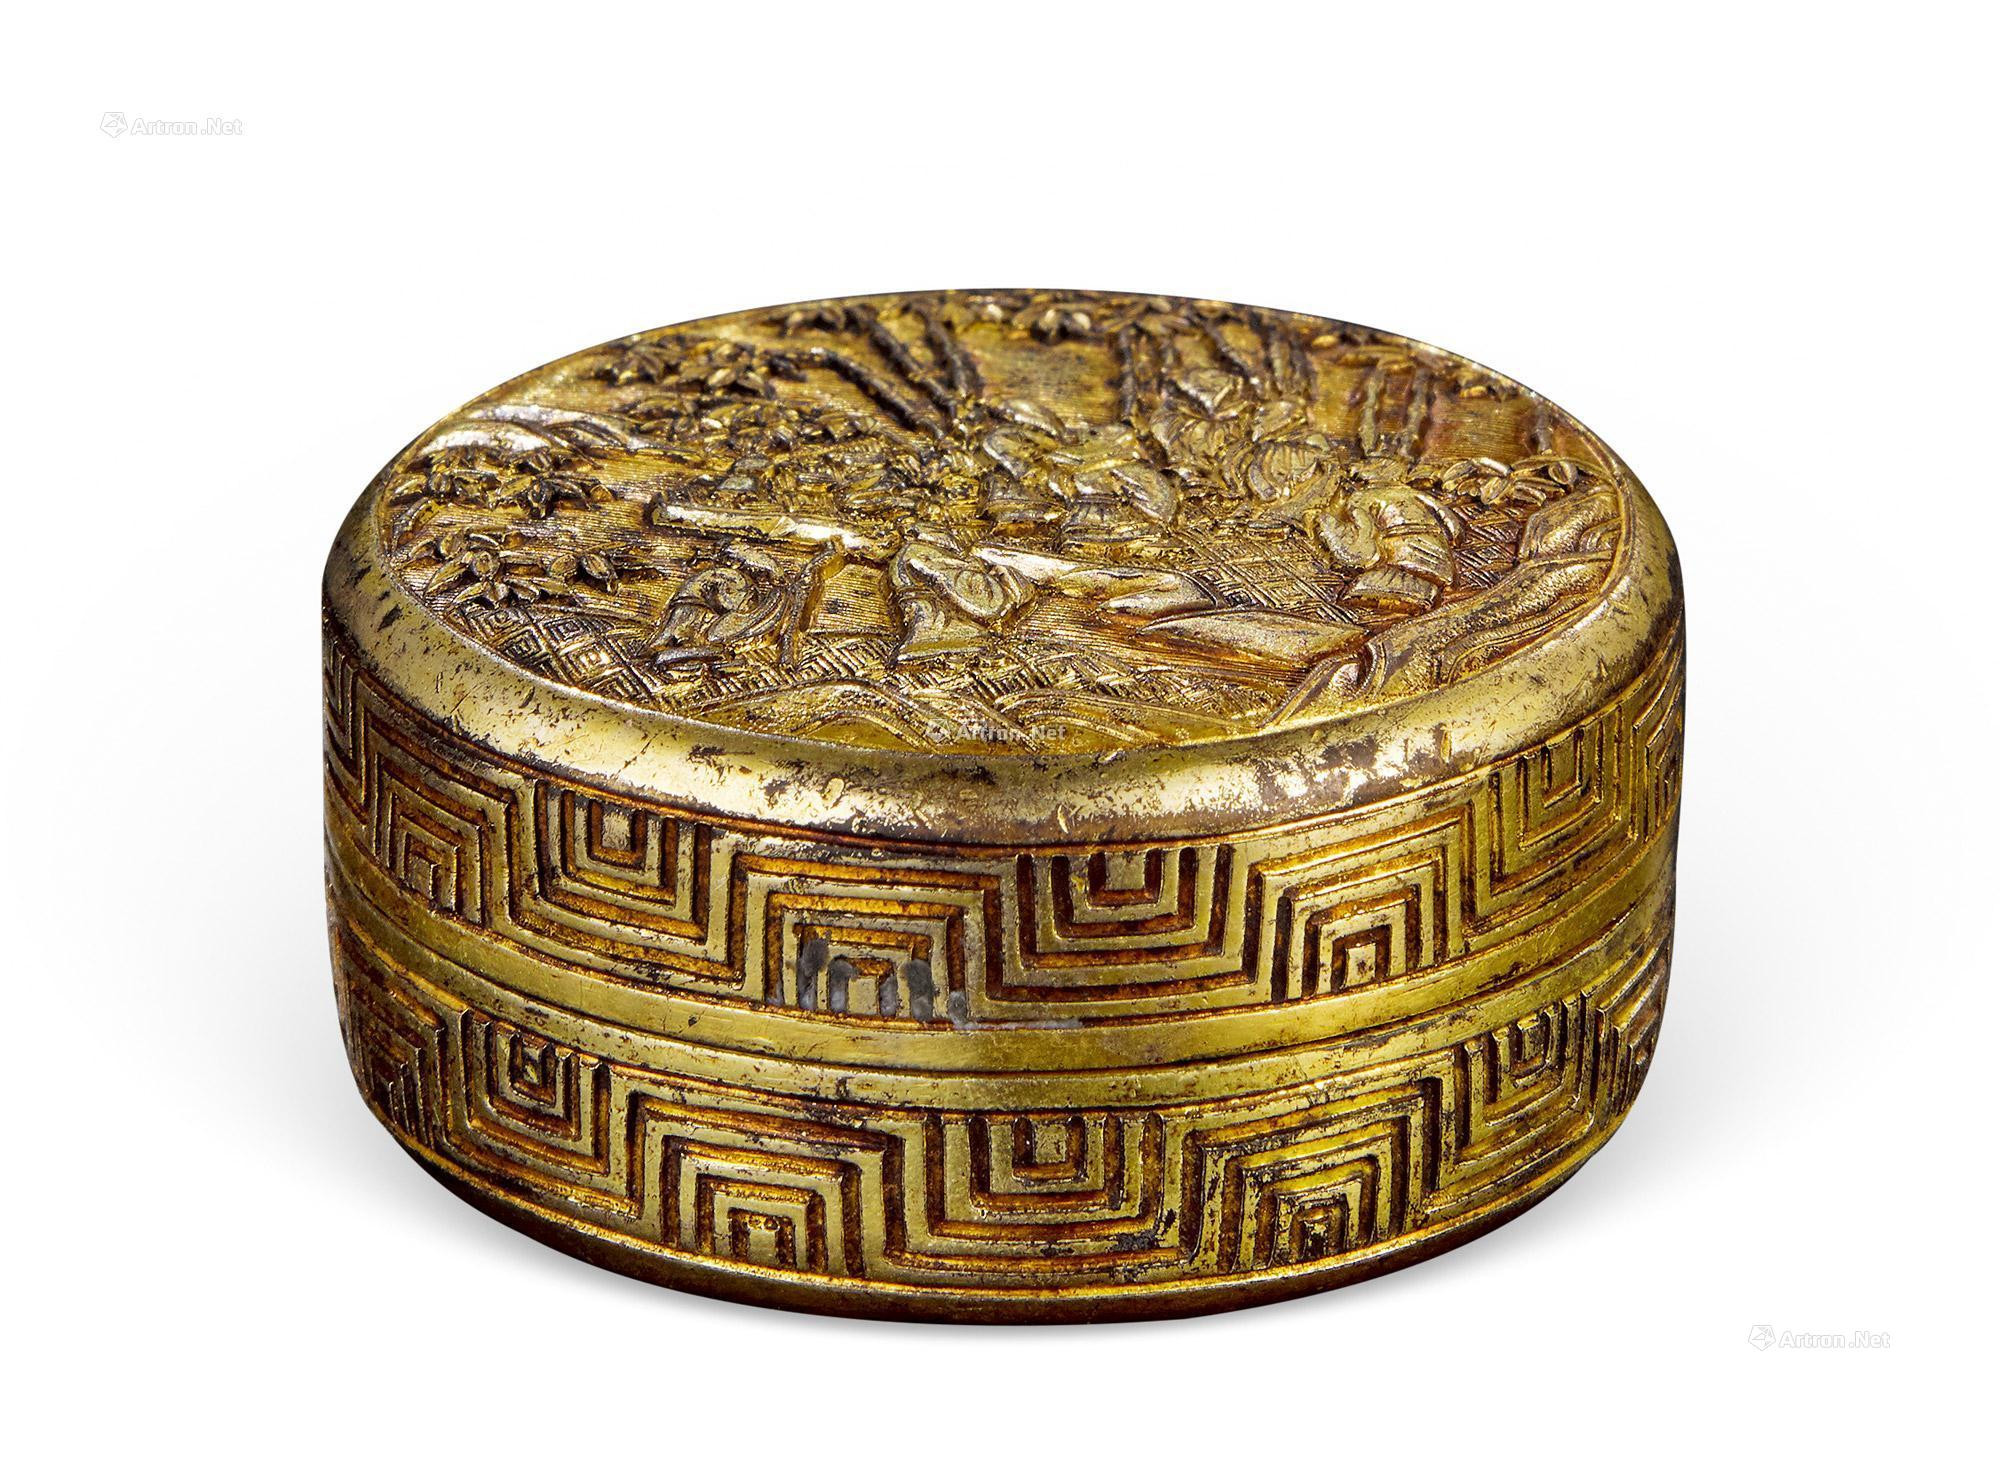 A PARCEL-GILT BRONZE INCENSE BOX AND COVER